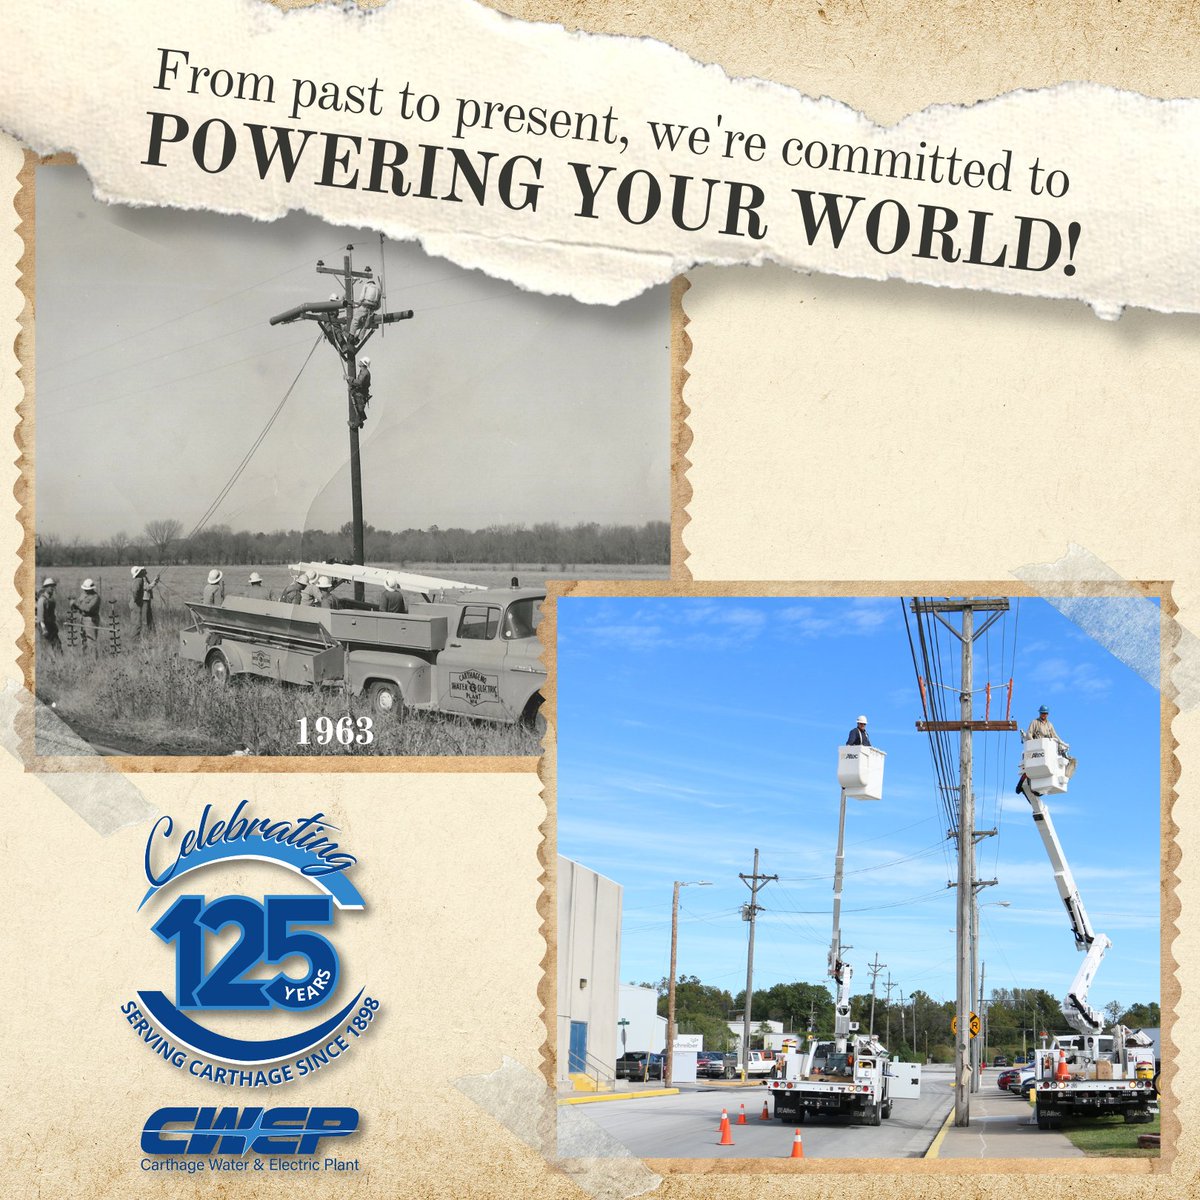 From then to now, the power of CWEP teamwork remains unchanged! 💪 

#PublicPower #CommunityPowered #servingourcommunity #125YearsStrong #CWEPHistory #carthagemo #417land